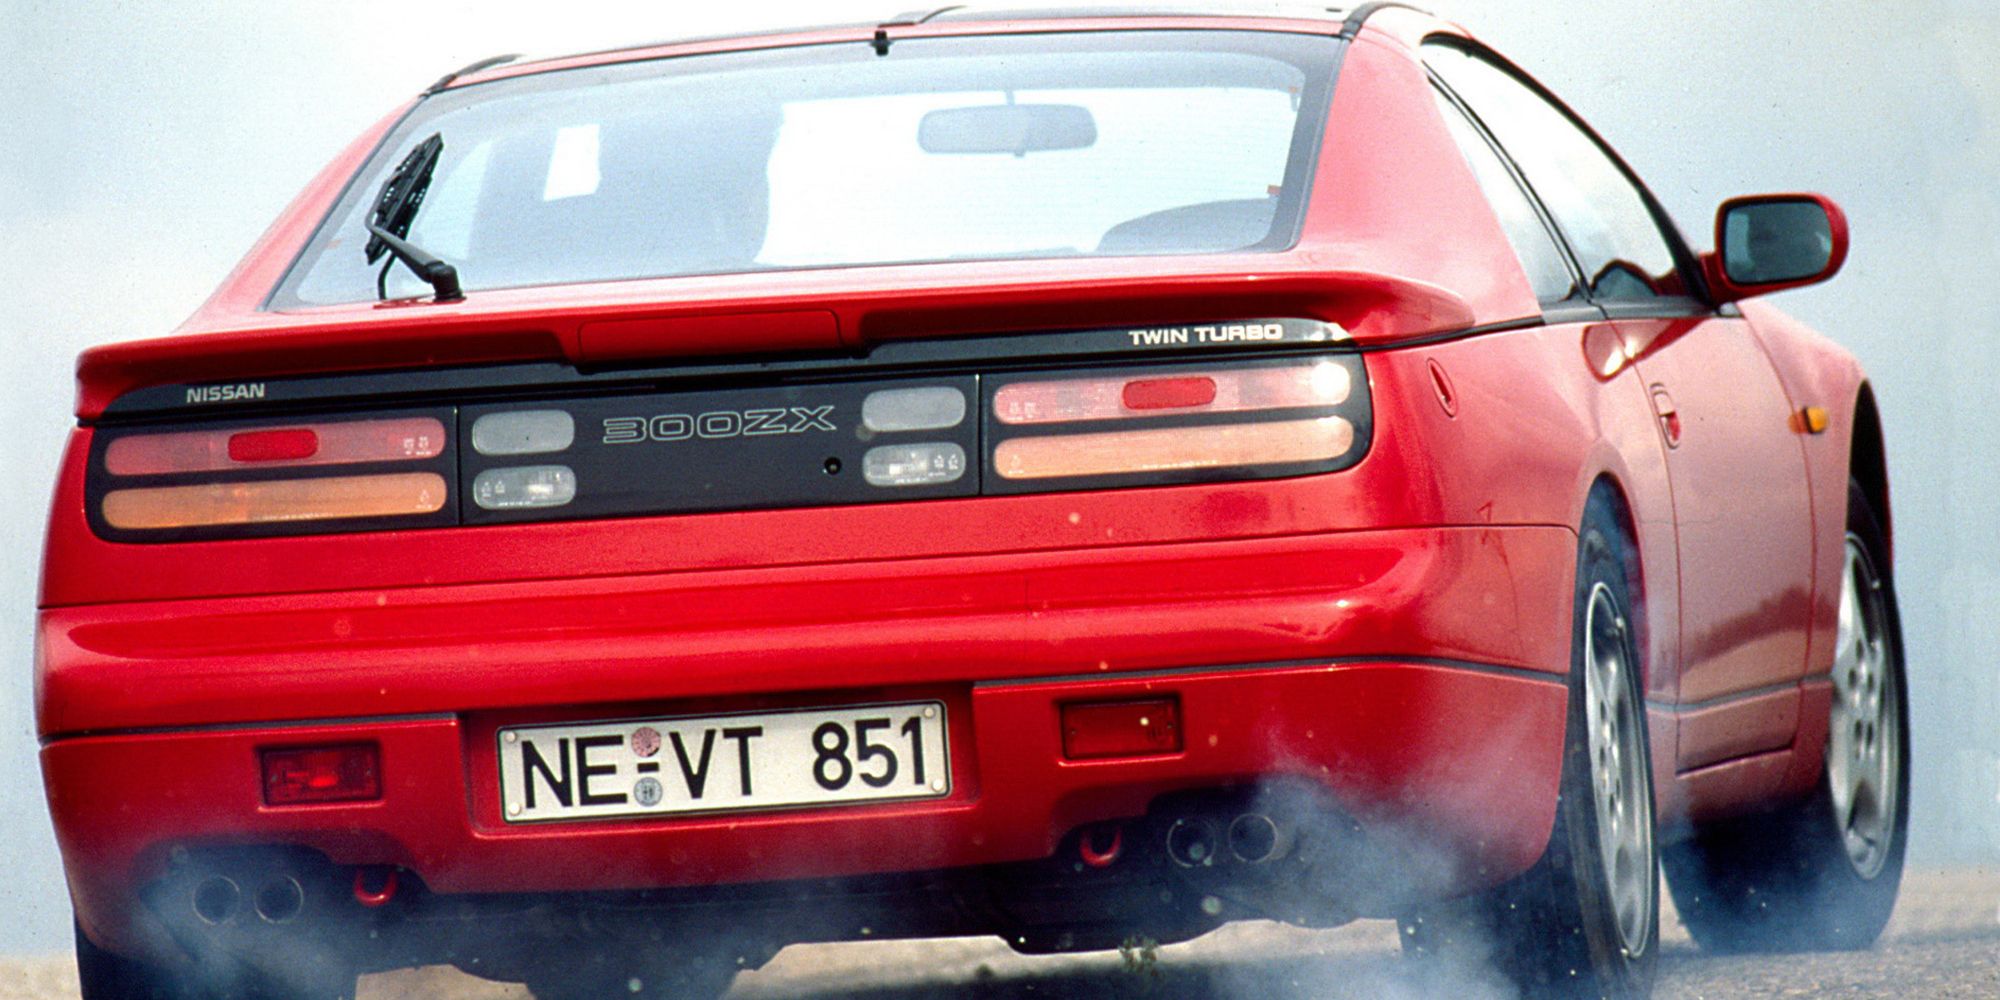 The 300ZX doing a burnout